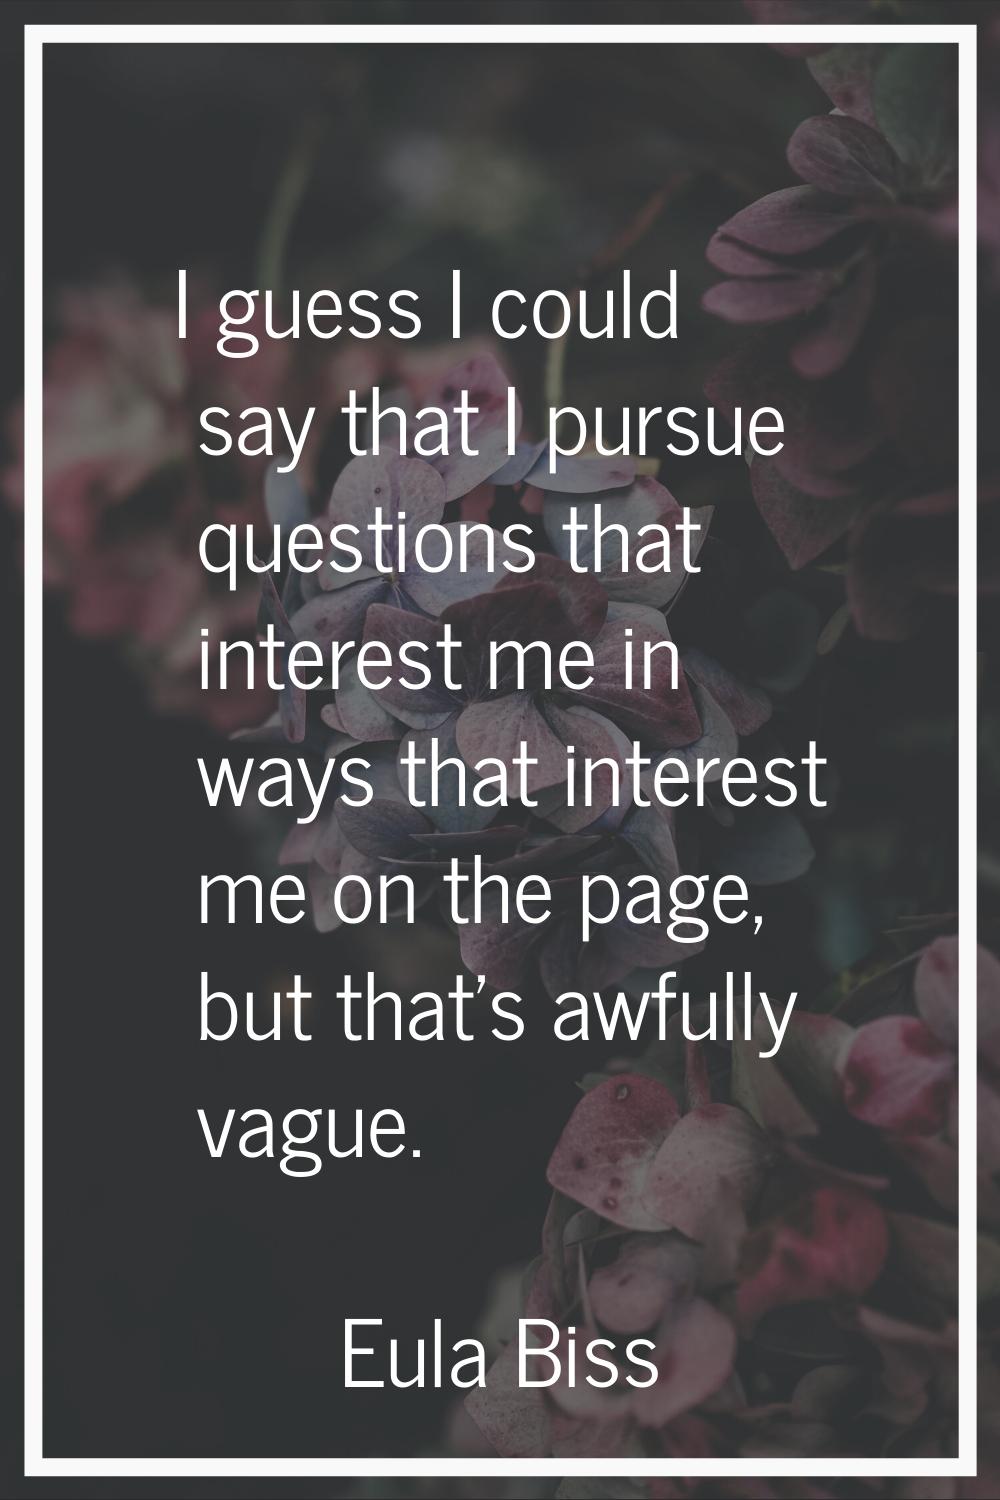 I guess I could say that I pursue questions that interest me in ways that interest me on the page, 